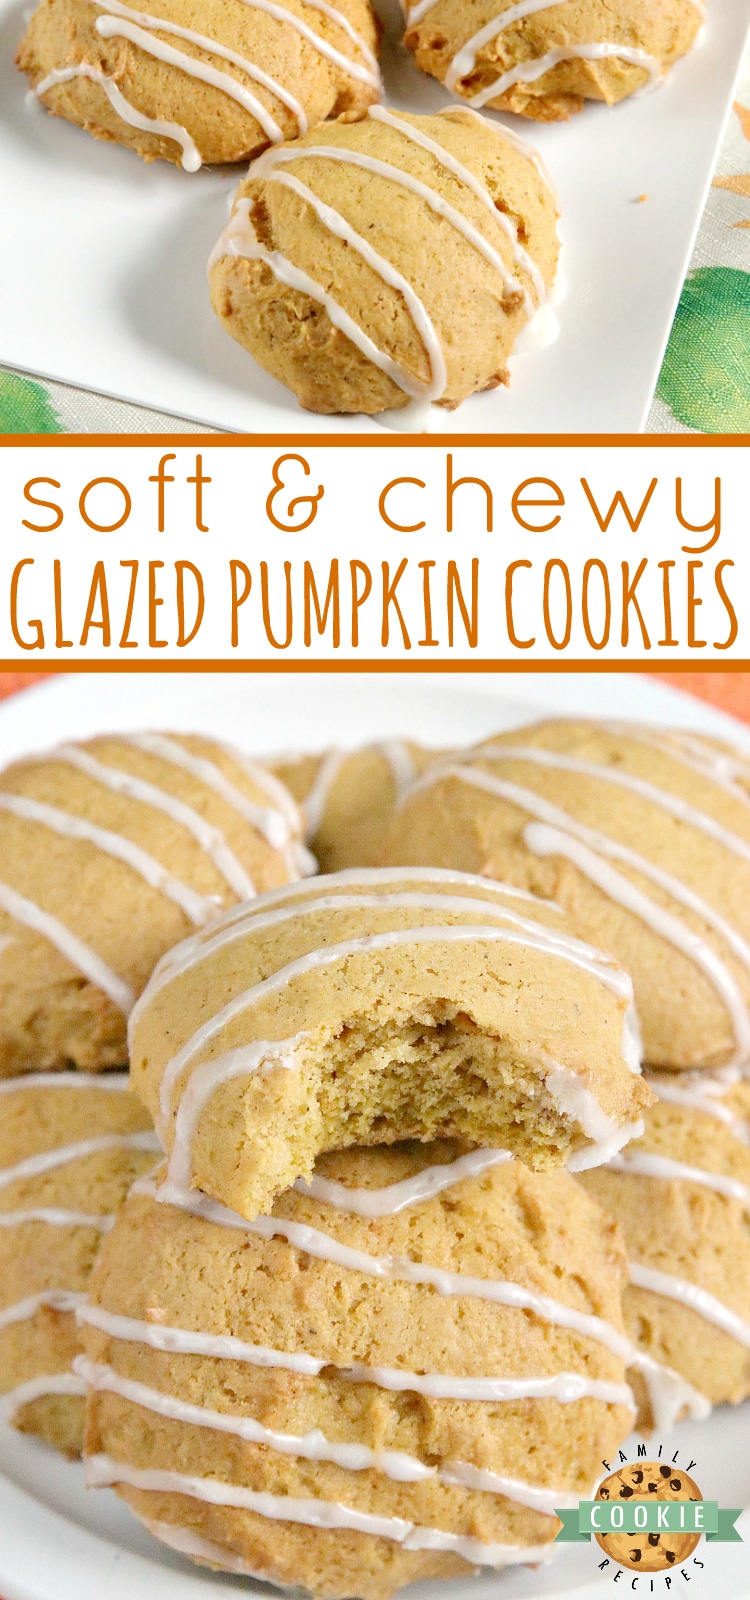 Glazed Pumpkin Cookies are soft and chewy and packed with pumpkin, nutmeg and cinnamon. This delicious pumpkin cookie recipe is easy to make and is even more delicious with the simple vanilla glaze drizzled on top. via @buttergirls